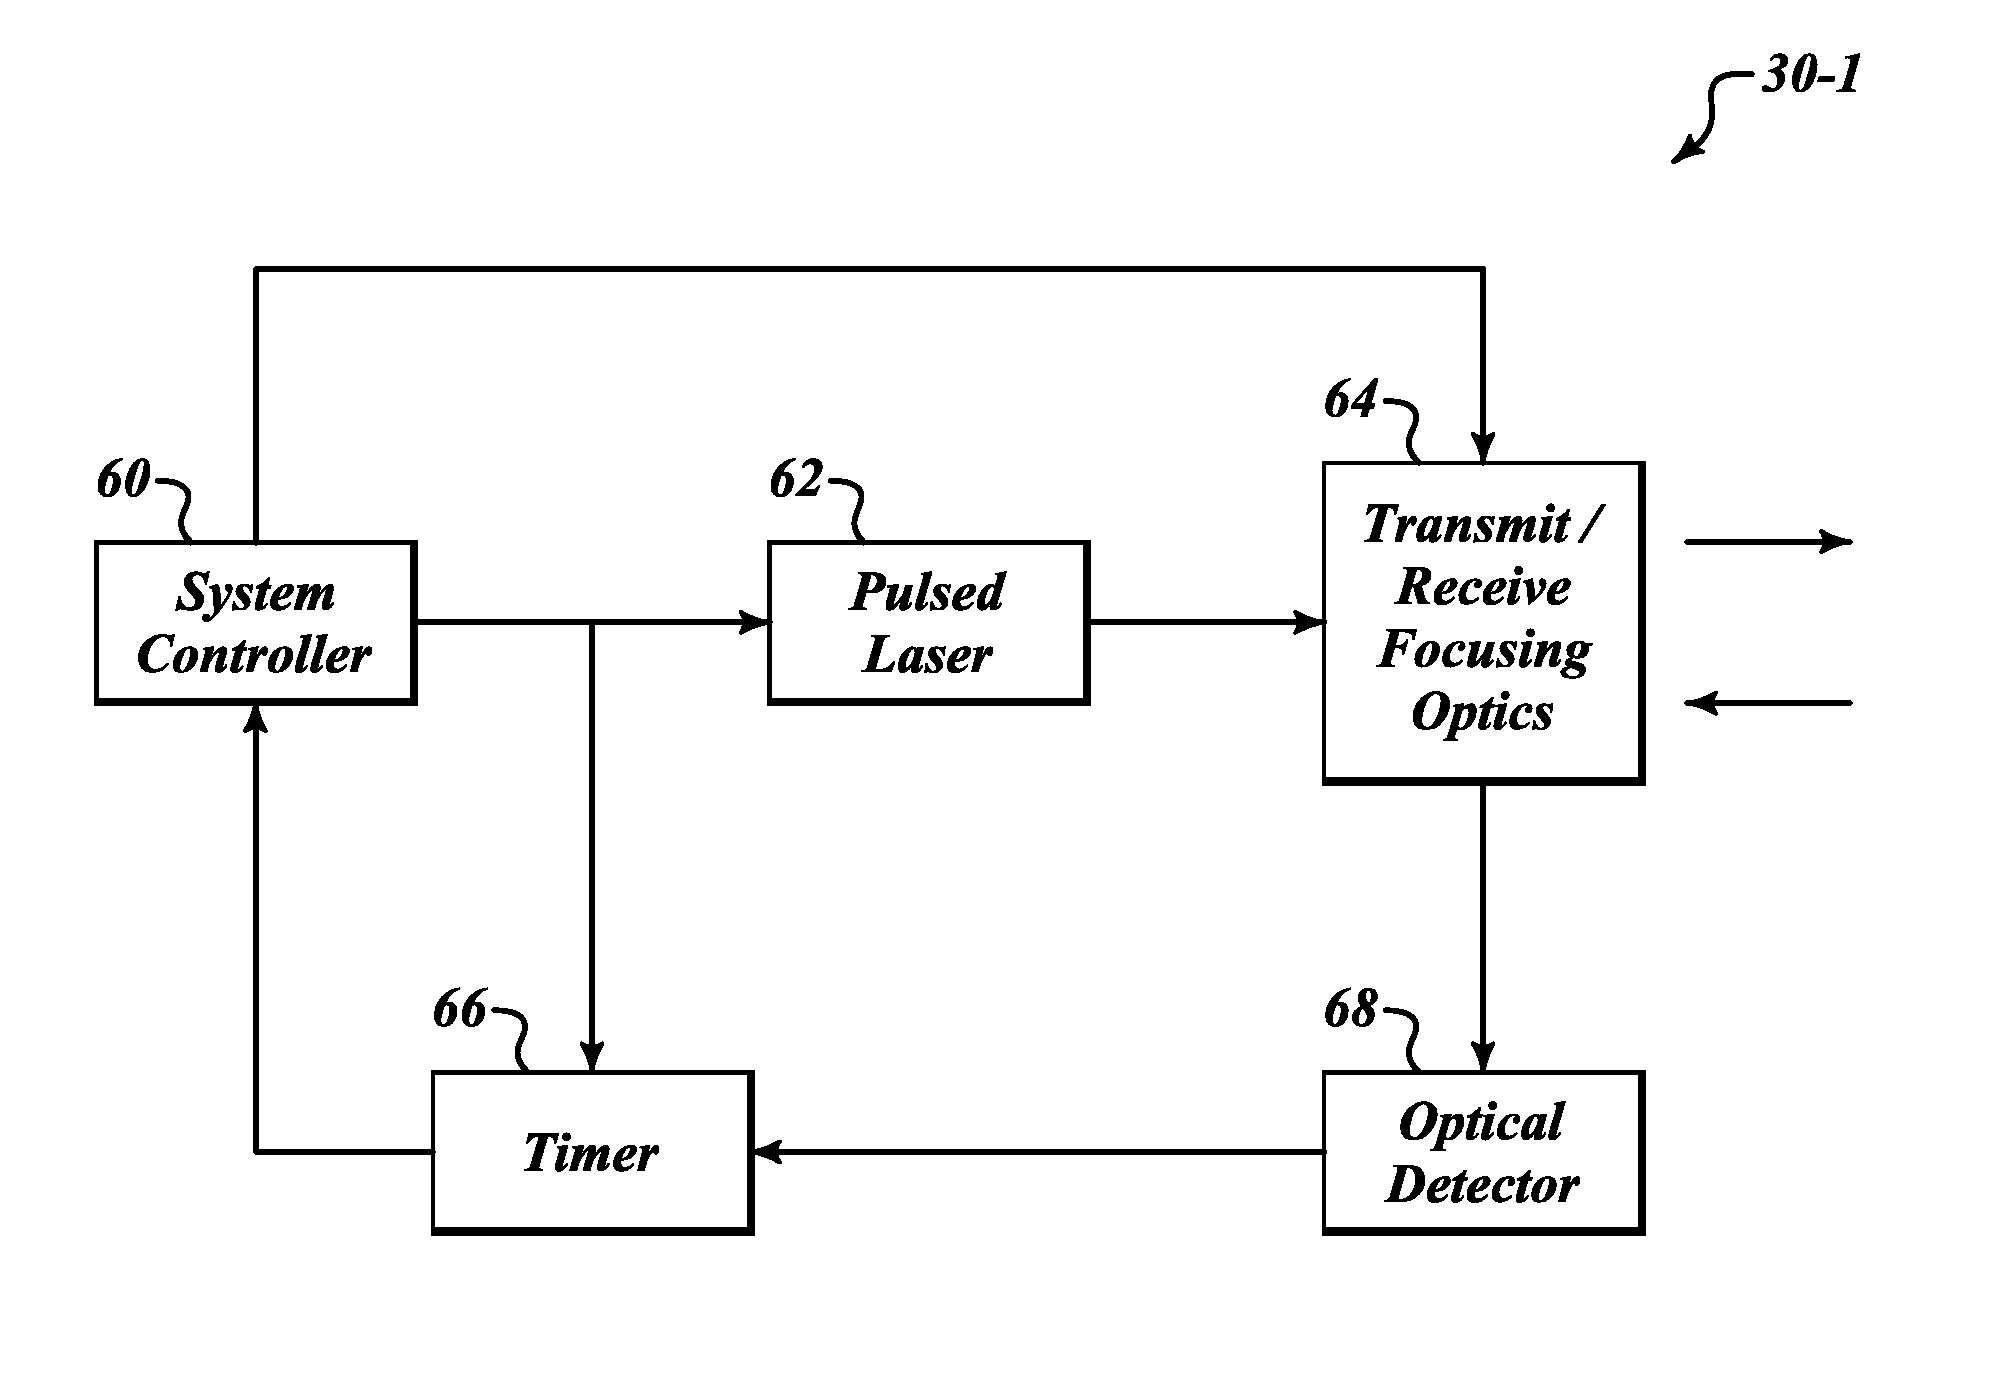 Systems and methods for safe laser imaging, detection and ranging (LIDAR) operation